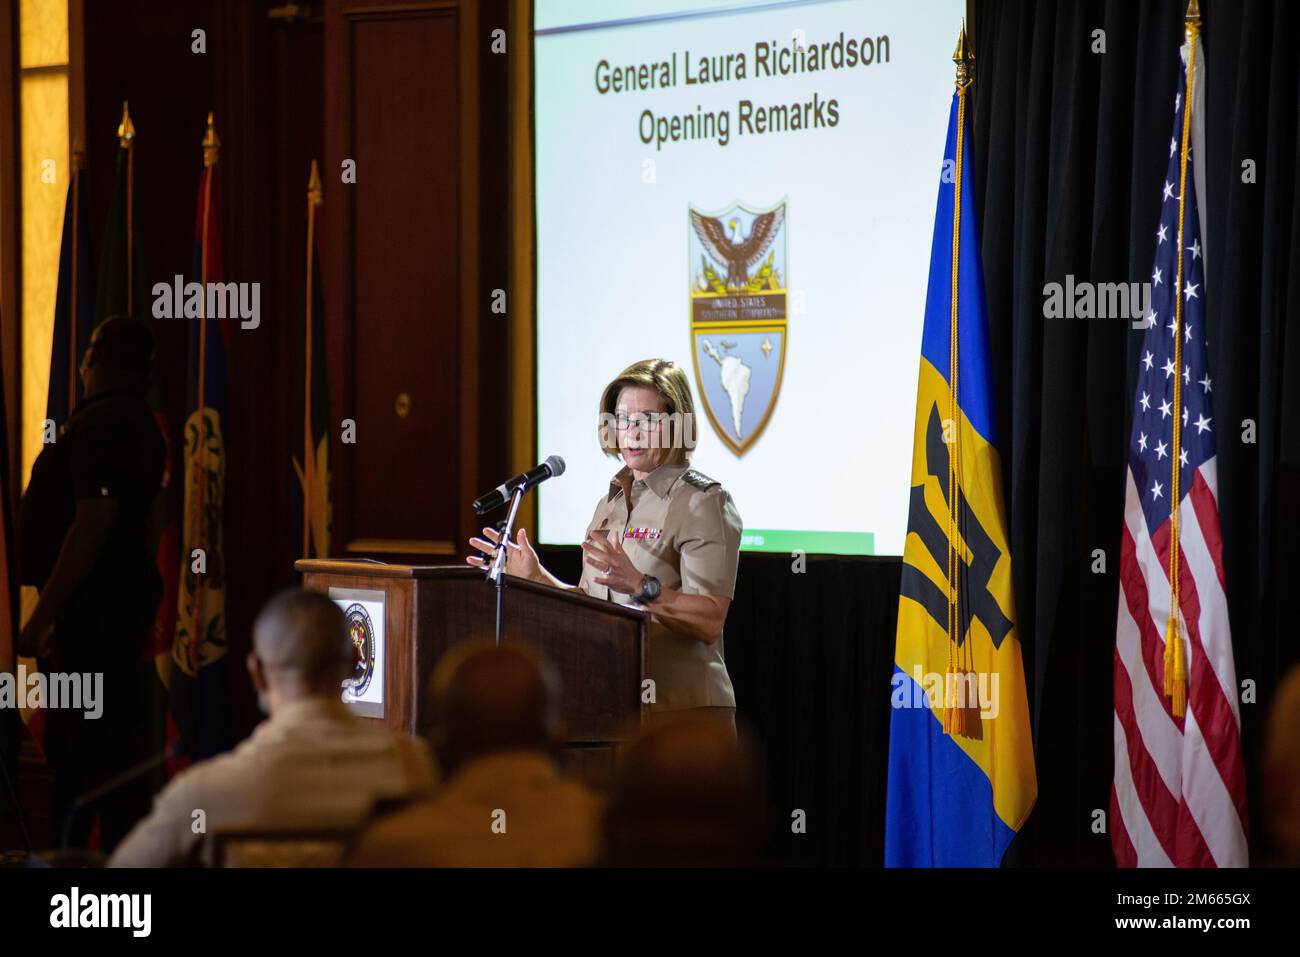 BRIDGETOWN, Barbados (April 6, 2022) – The commander of U.S. Southern Command, U.S. Army Gen. Laura J. Richardson, provides opening remarks for the Caribbean Nations Security Conference in Bridgetown, Barbados. CANSEC 22 brought together leaders from partner nations around the Caribbean region and other allied nations to discuss security cooperation issues ranging from climate change to countering transnational criminal organizations to natural disaster response April 5-7, 2022. Stock Photo